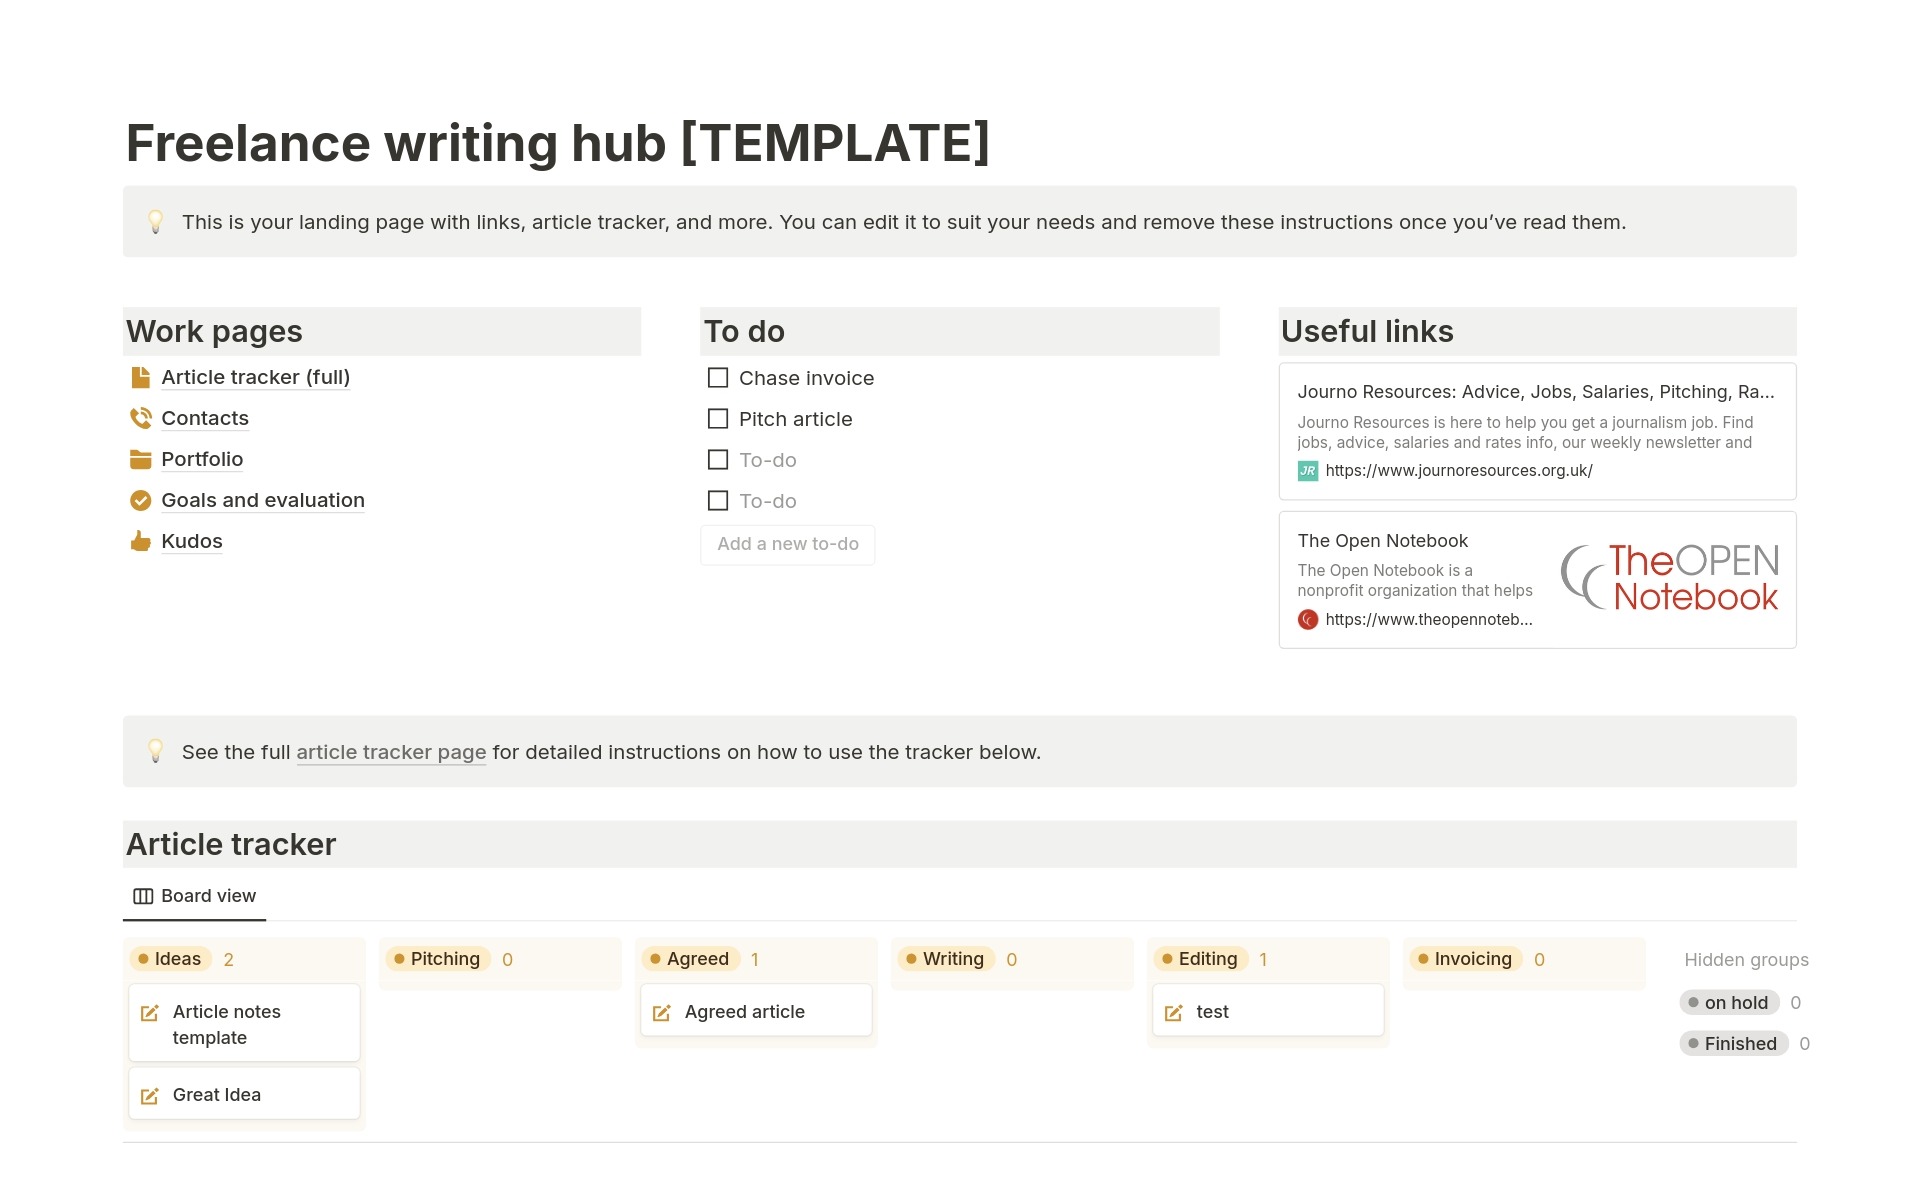 An article tracker for freelance writers and journalists, integrated into a useful hub with contacts and other pages.